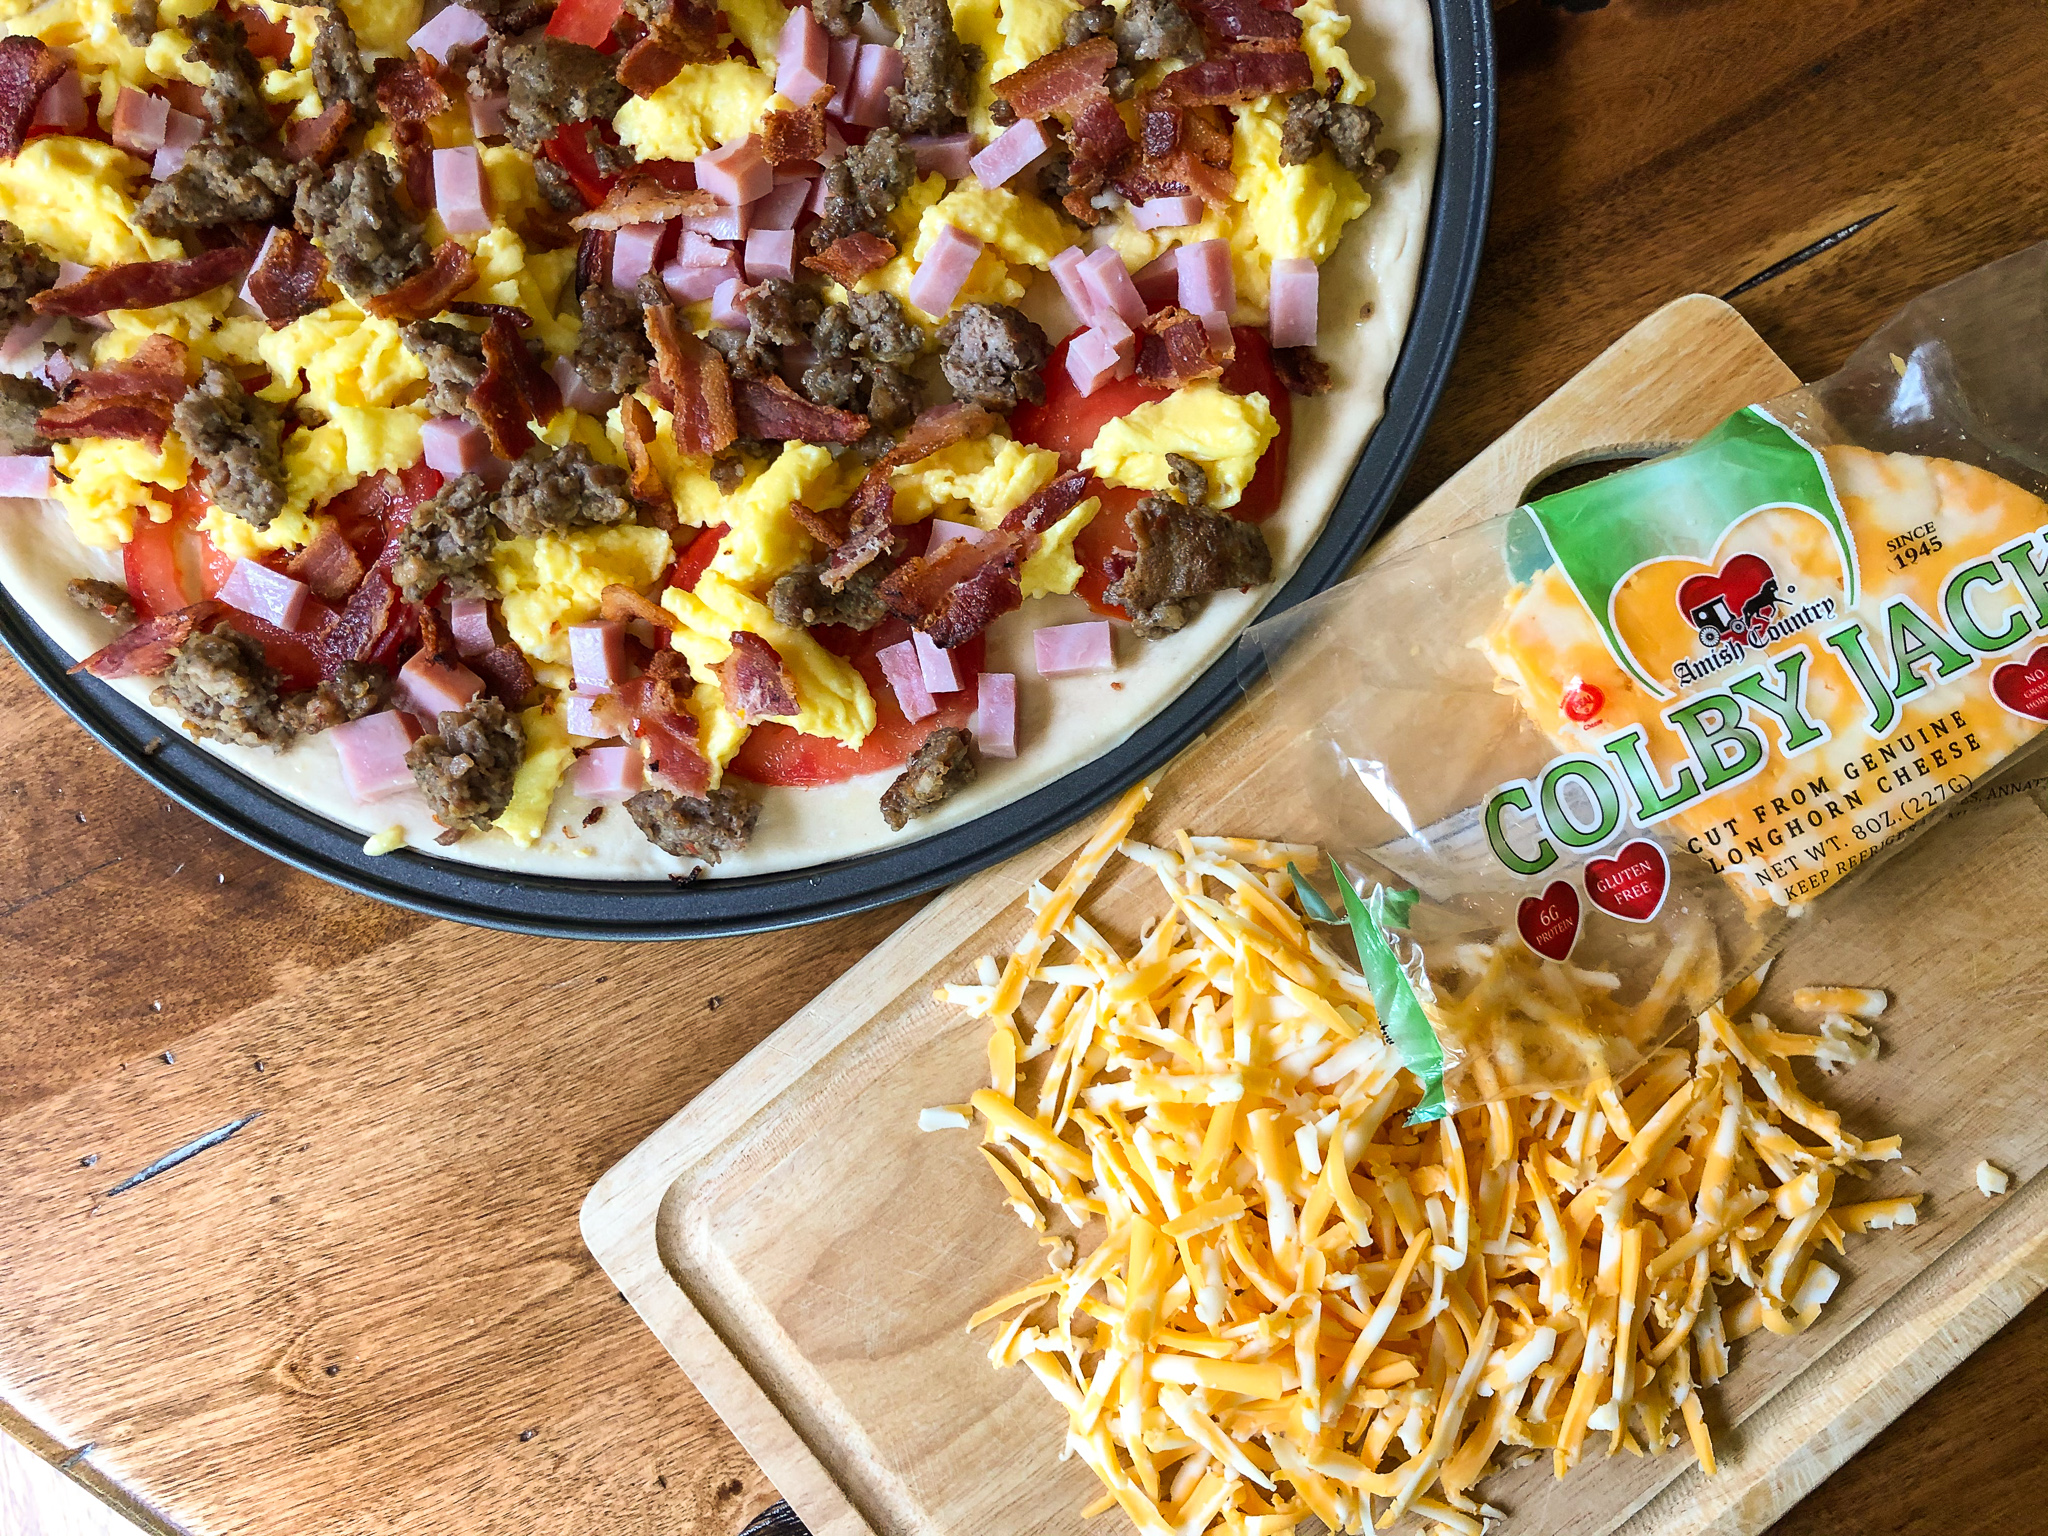 Delicious Amish Country Cheese Is BOGO At Publix - Use It To Serve Up A Tasty Breakfast Your Whole Family Will Love! on I Heart Publix